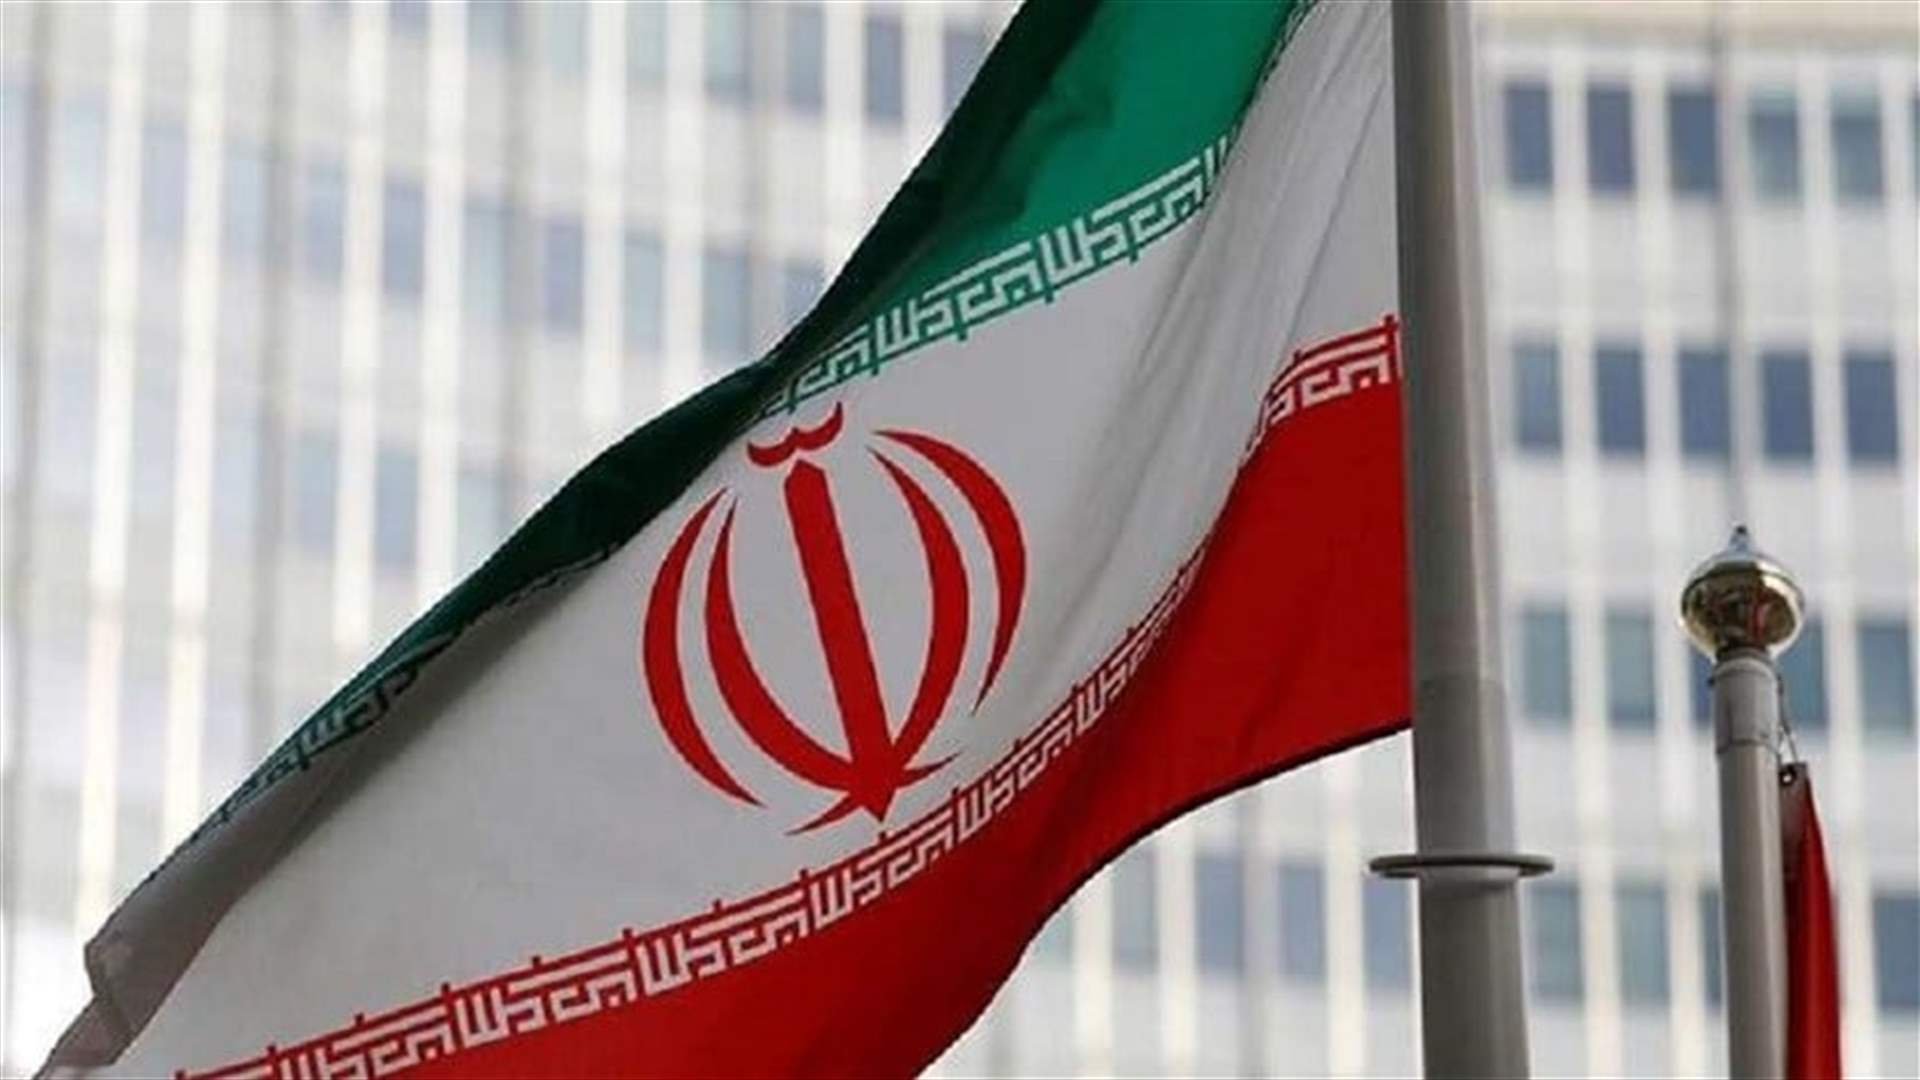 Unofficial reports: Iran election turnout around 40%